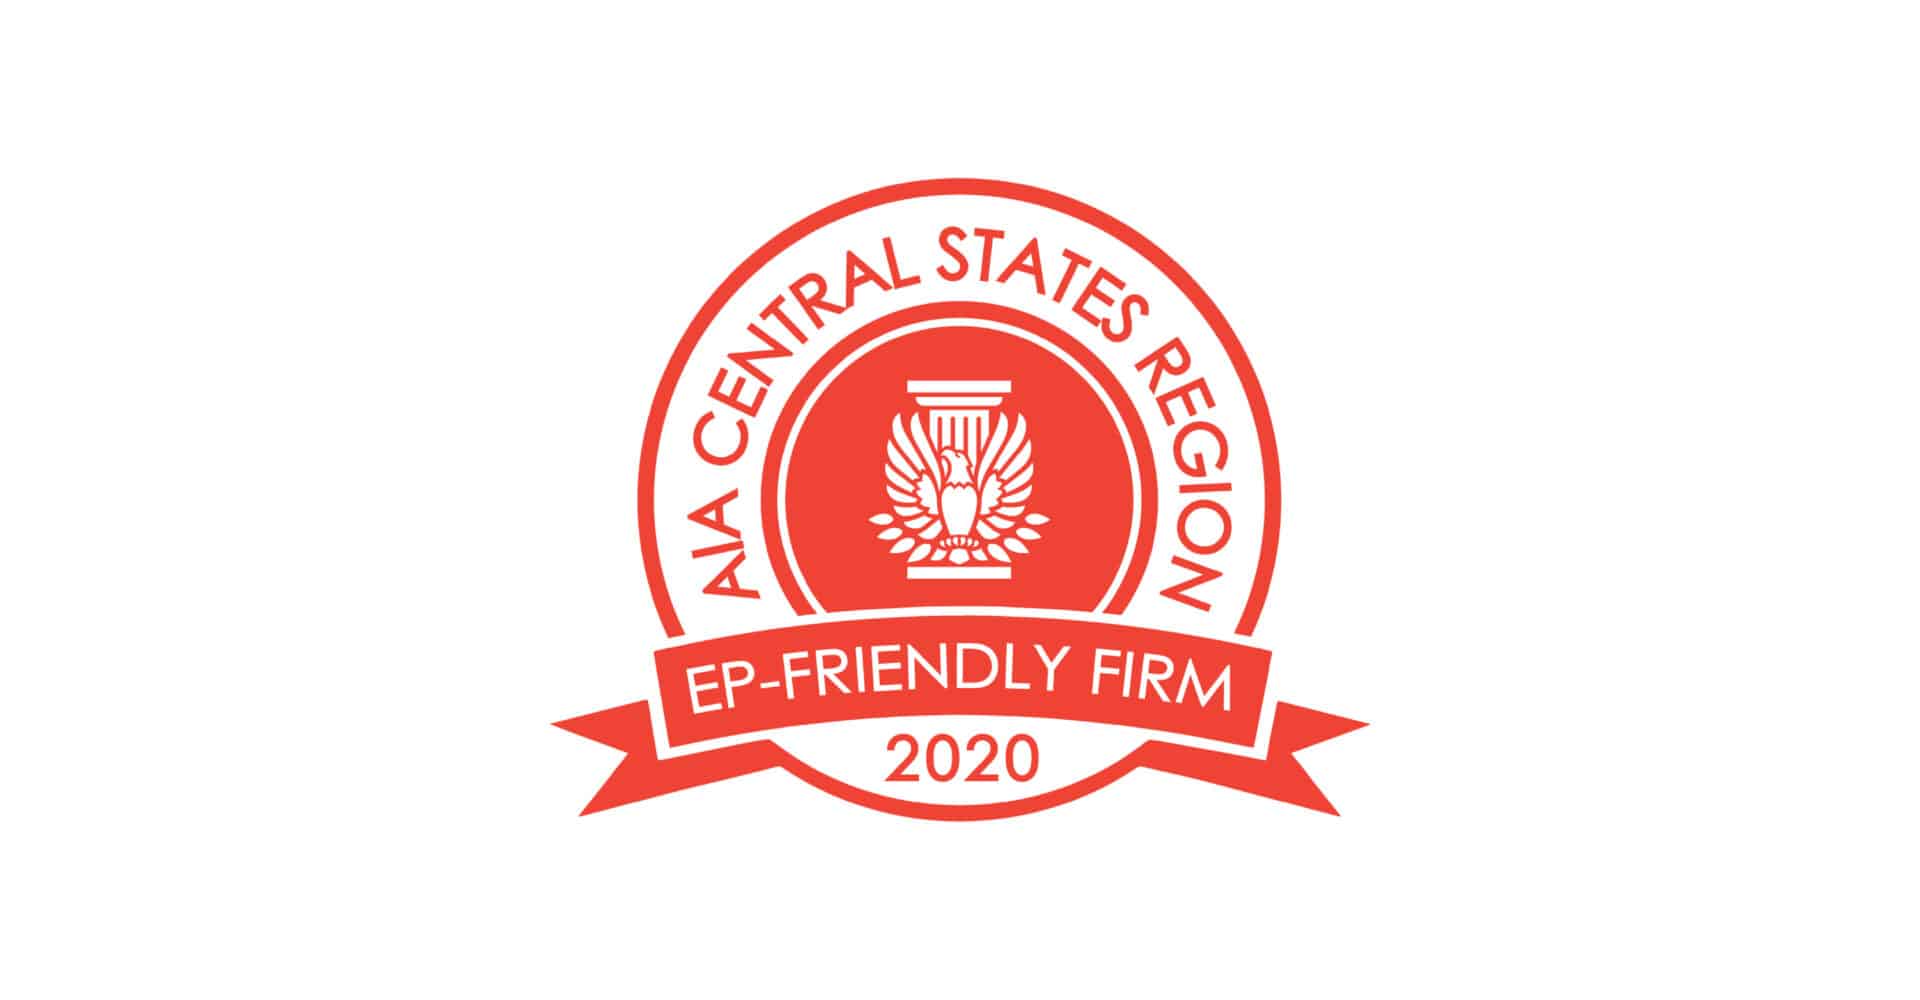 AIA Central States Region EP Friendly Firm 2020 Badge